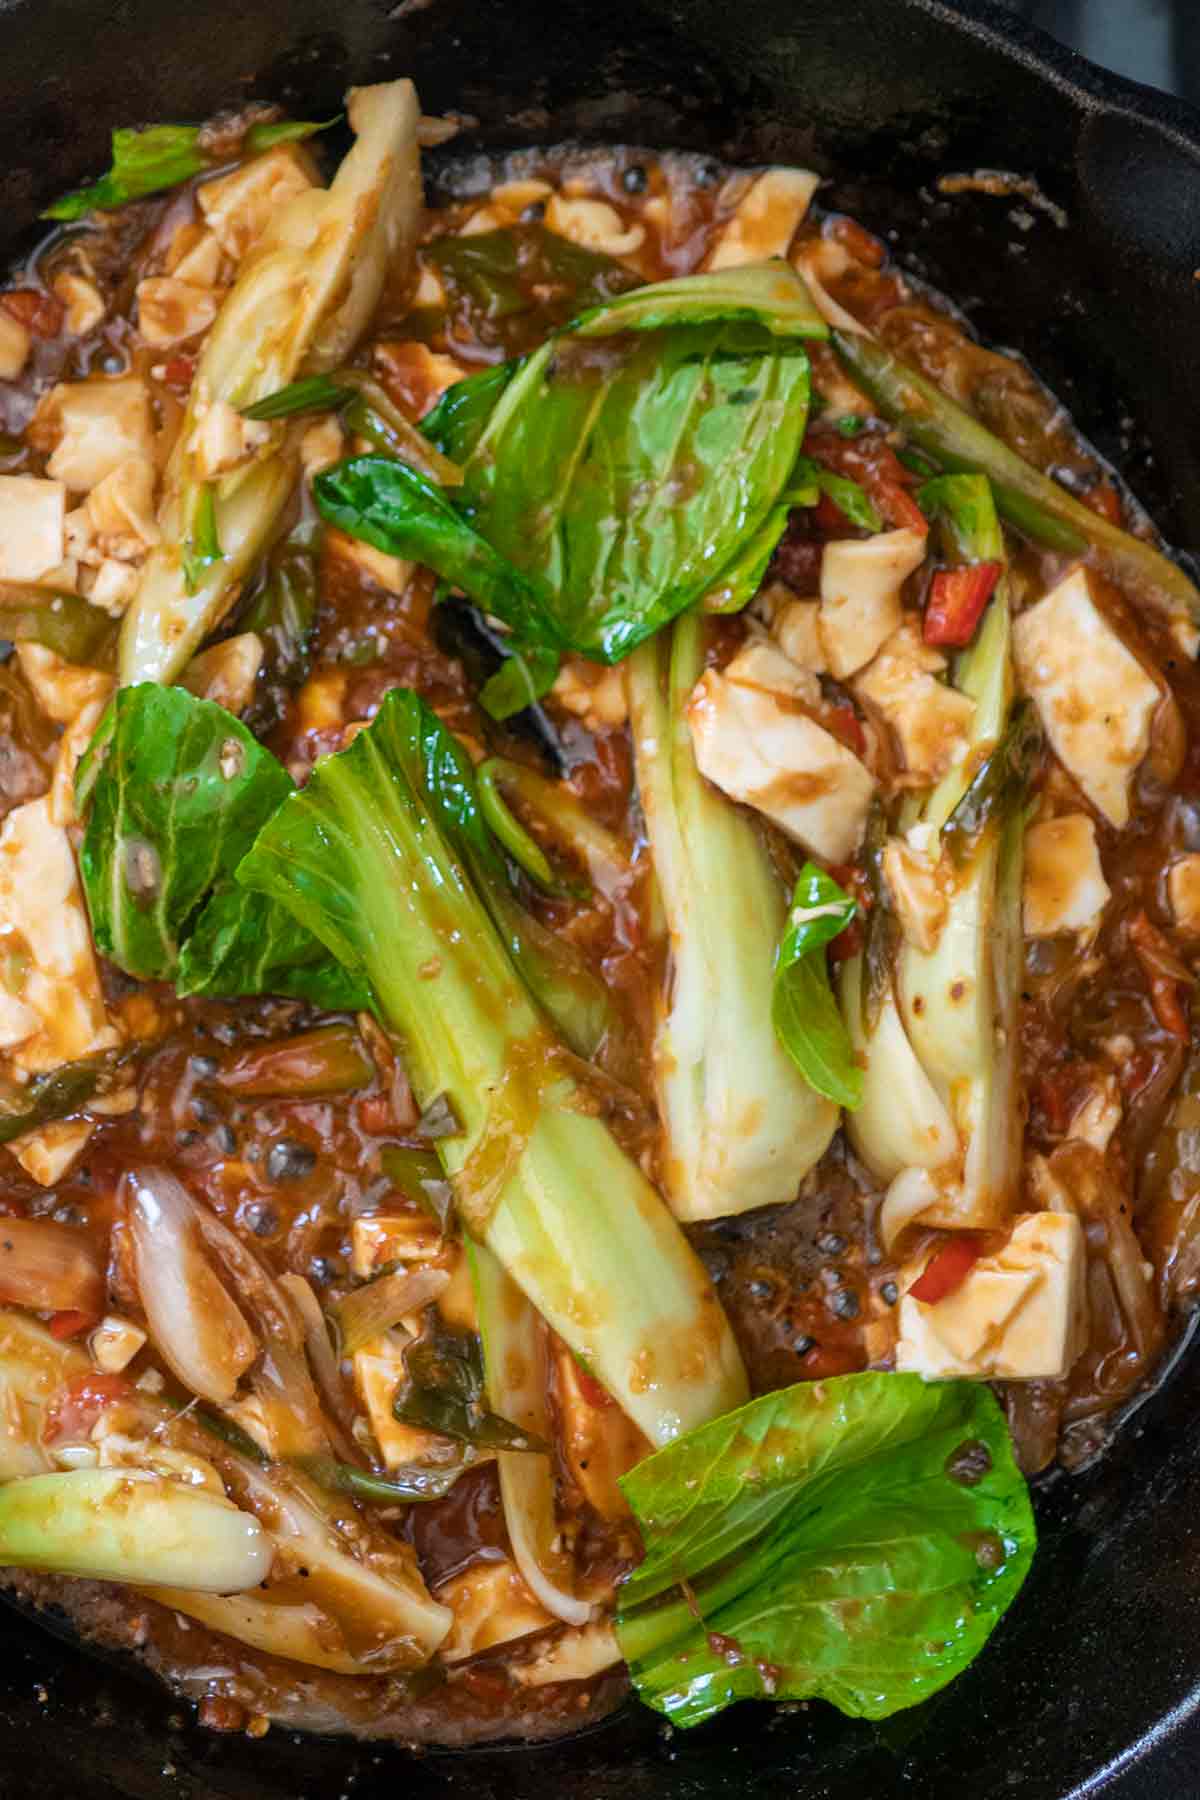 bok choy and cubed tofu cooking in a skillet with schezwan sauce